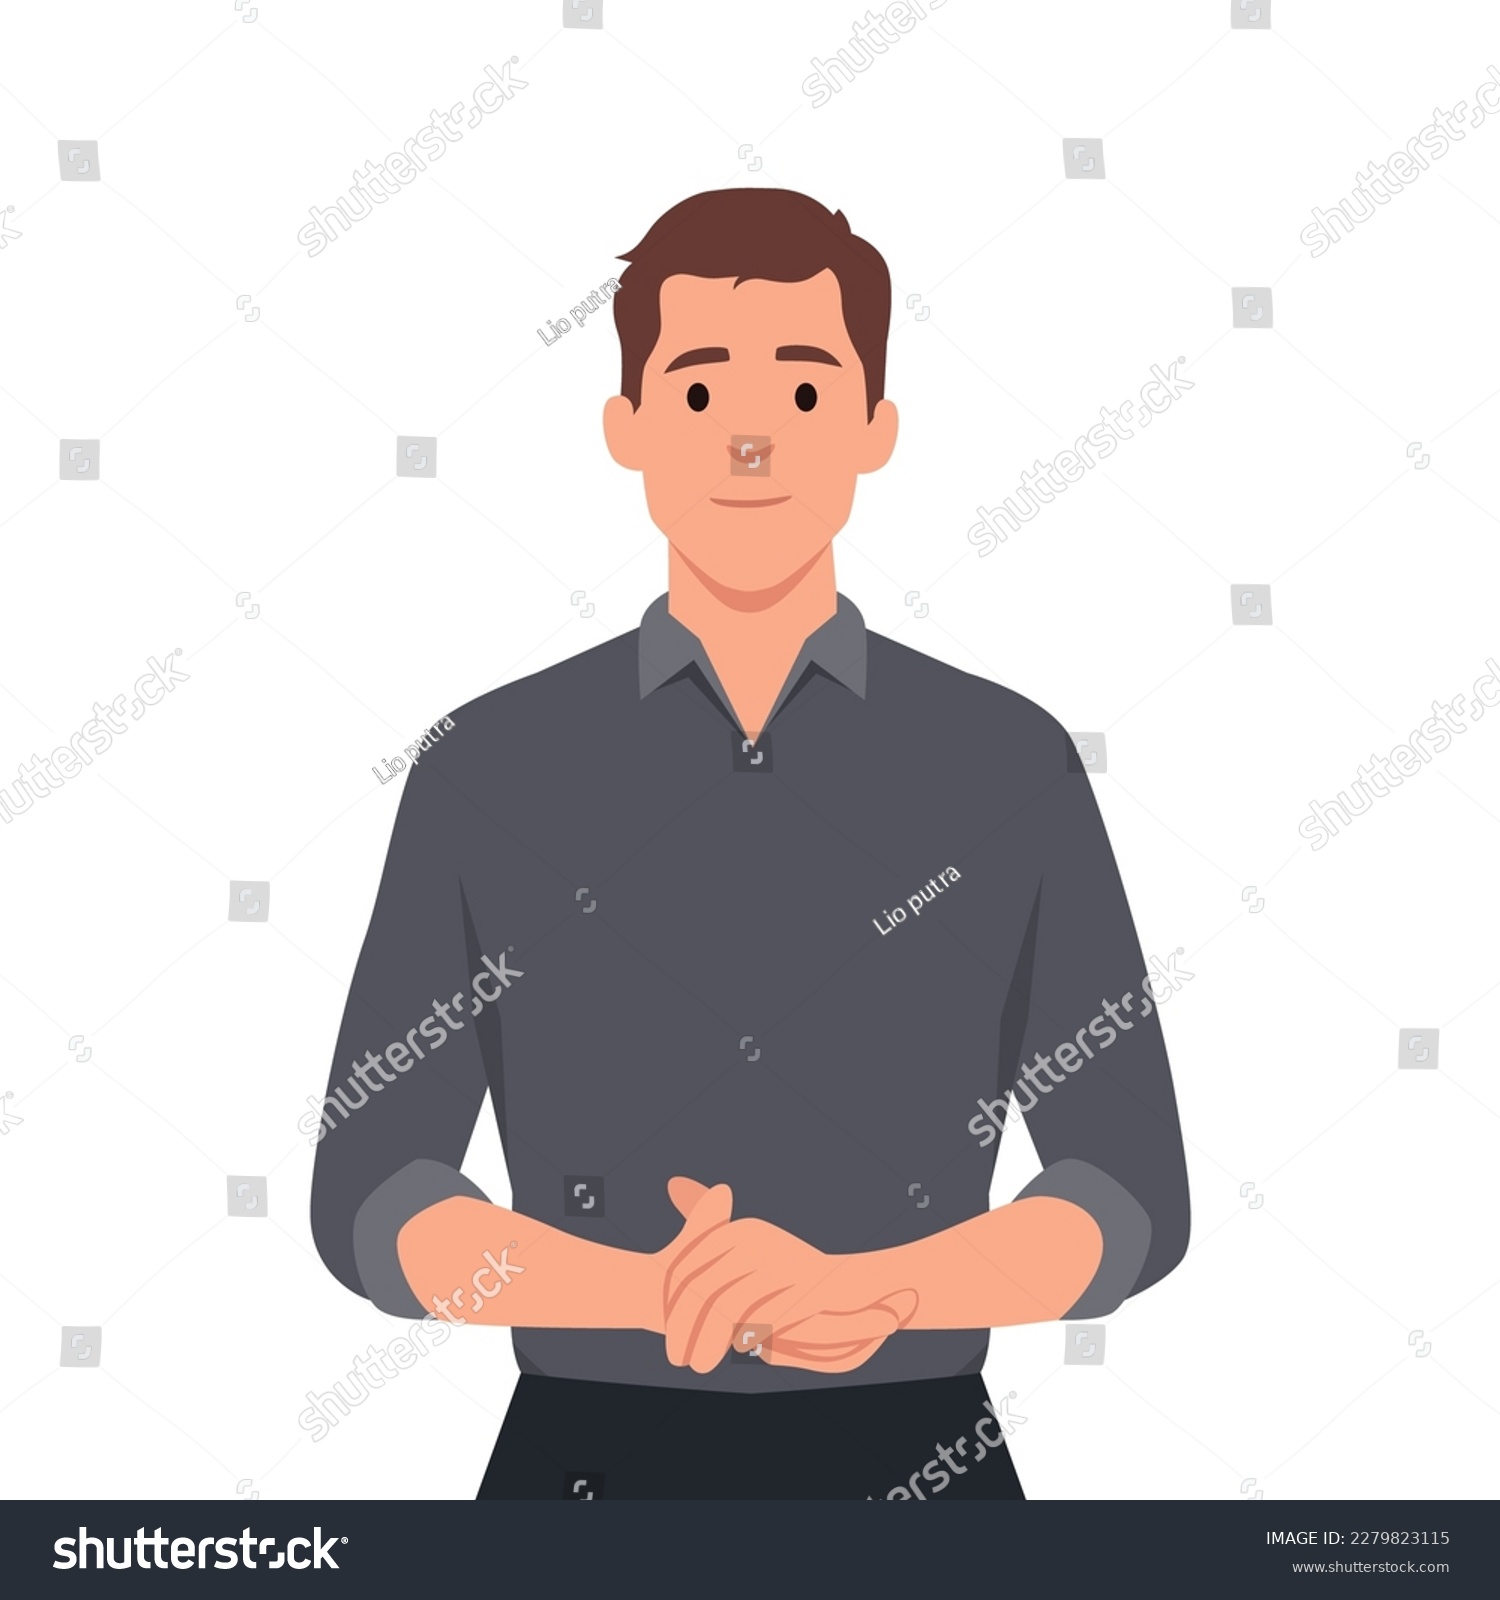 SVG of Young man standing with holding his hands in front of his stomach. Smiling man. Flat vector illustration isolated on white background svg